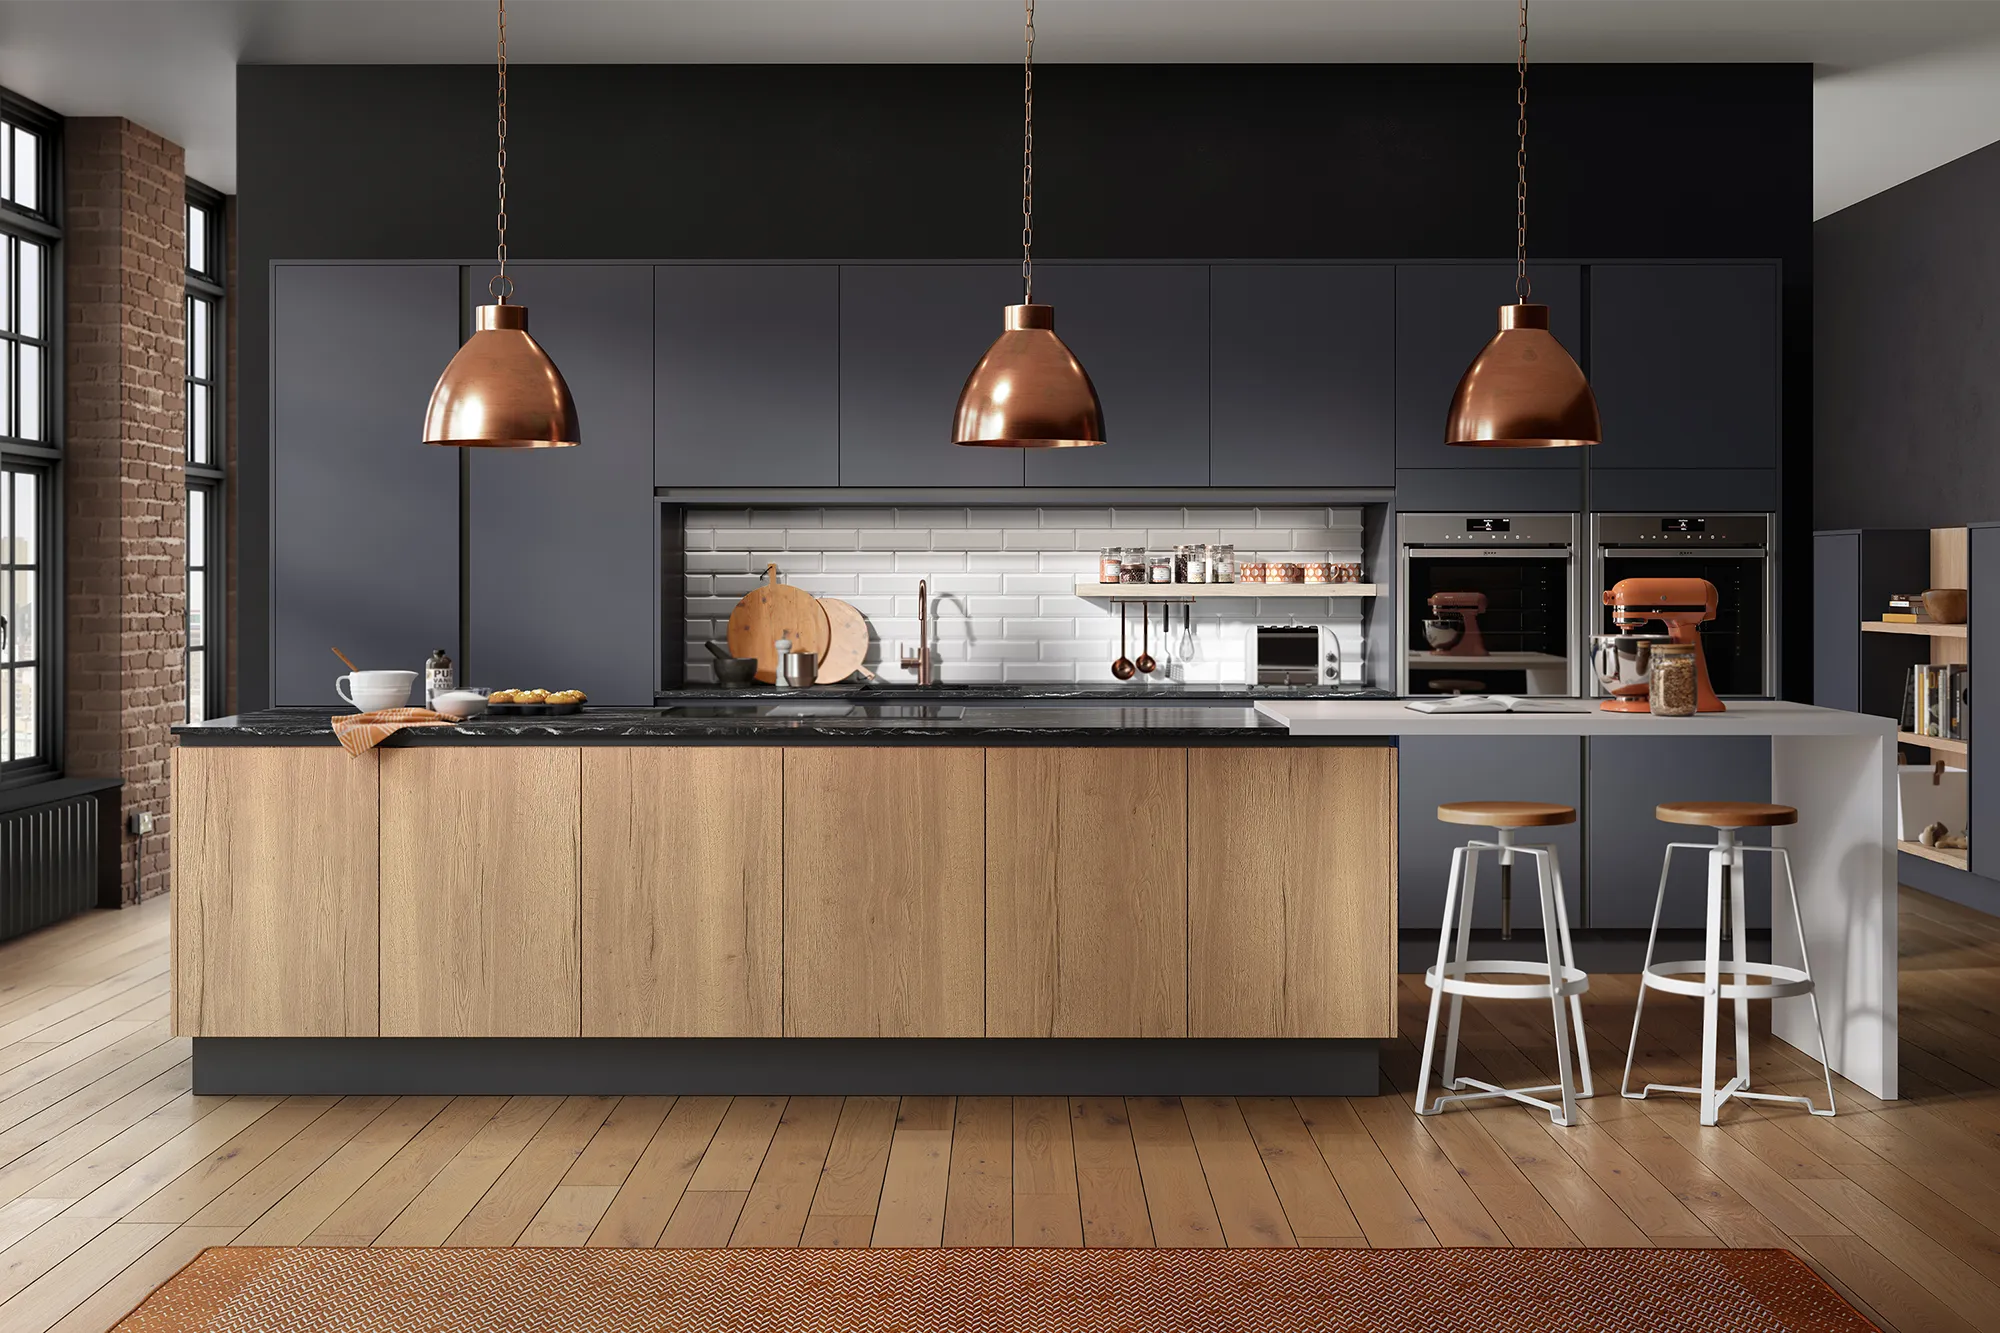 a modern kitchen with a wooden floor and black walls